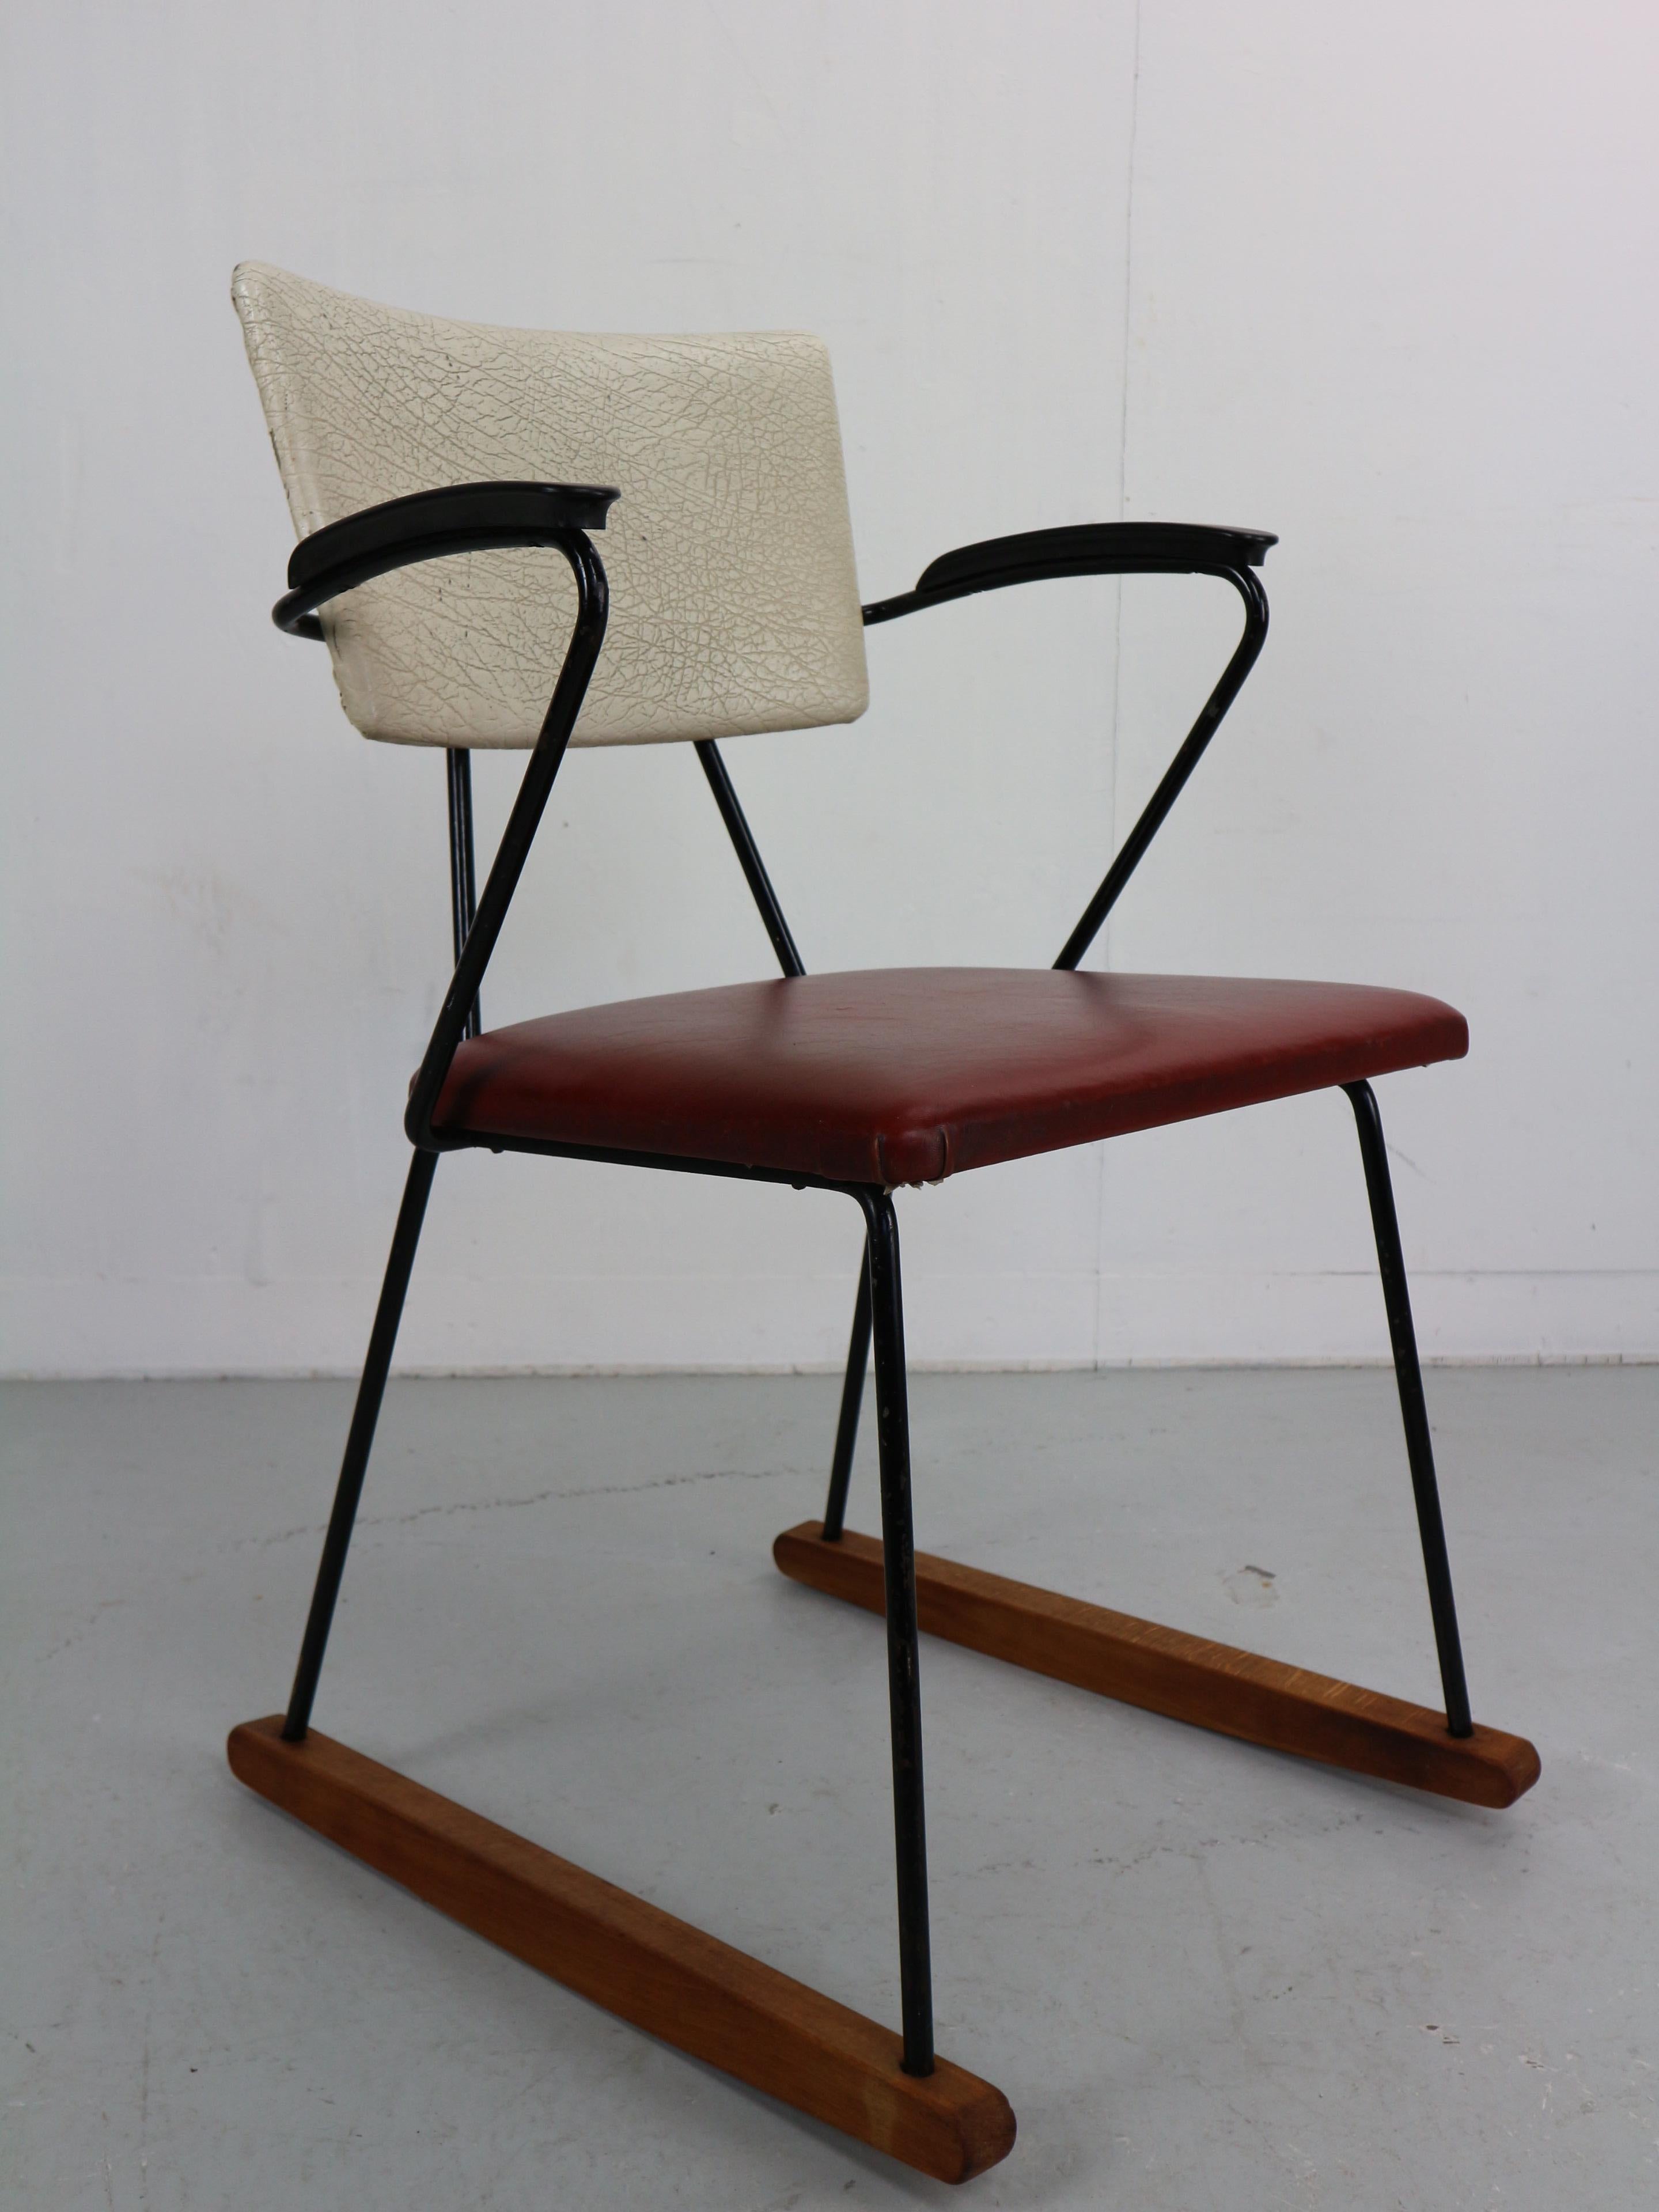 Rockingchair by WH Gispen for Kembo Netherlands. in original with original fabric and armrests in bakelite, black tubular structures and wooden sliders. From the 50's.
New upholstery is possible. Typical Dutch industrial design, very rare edition